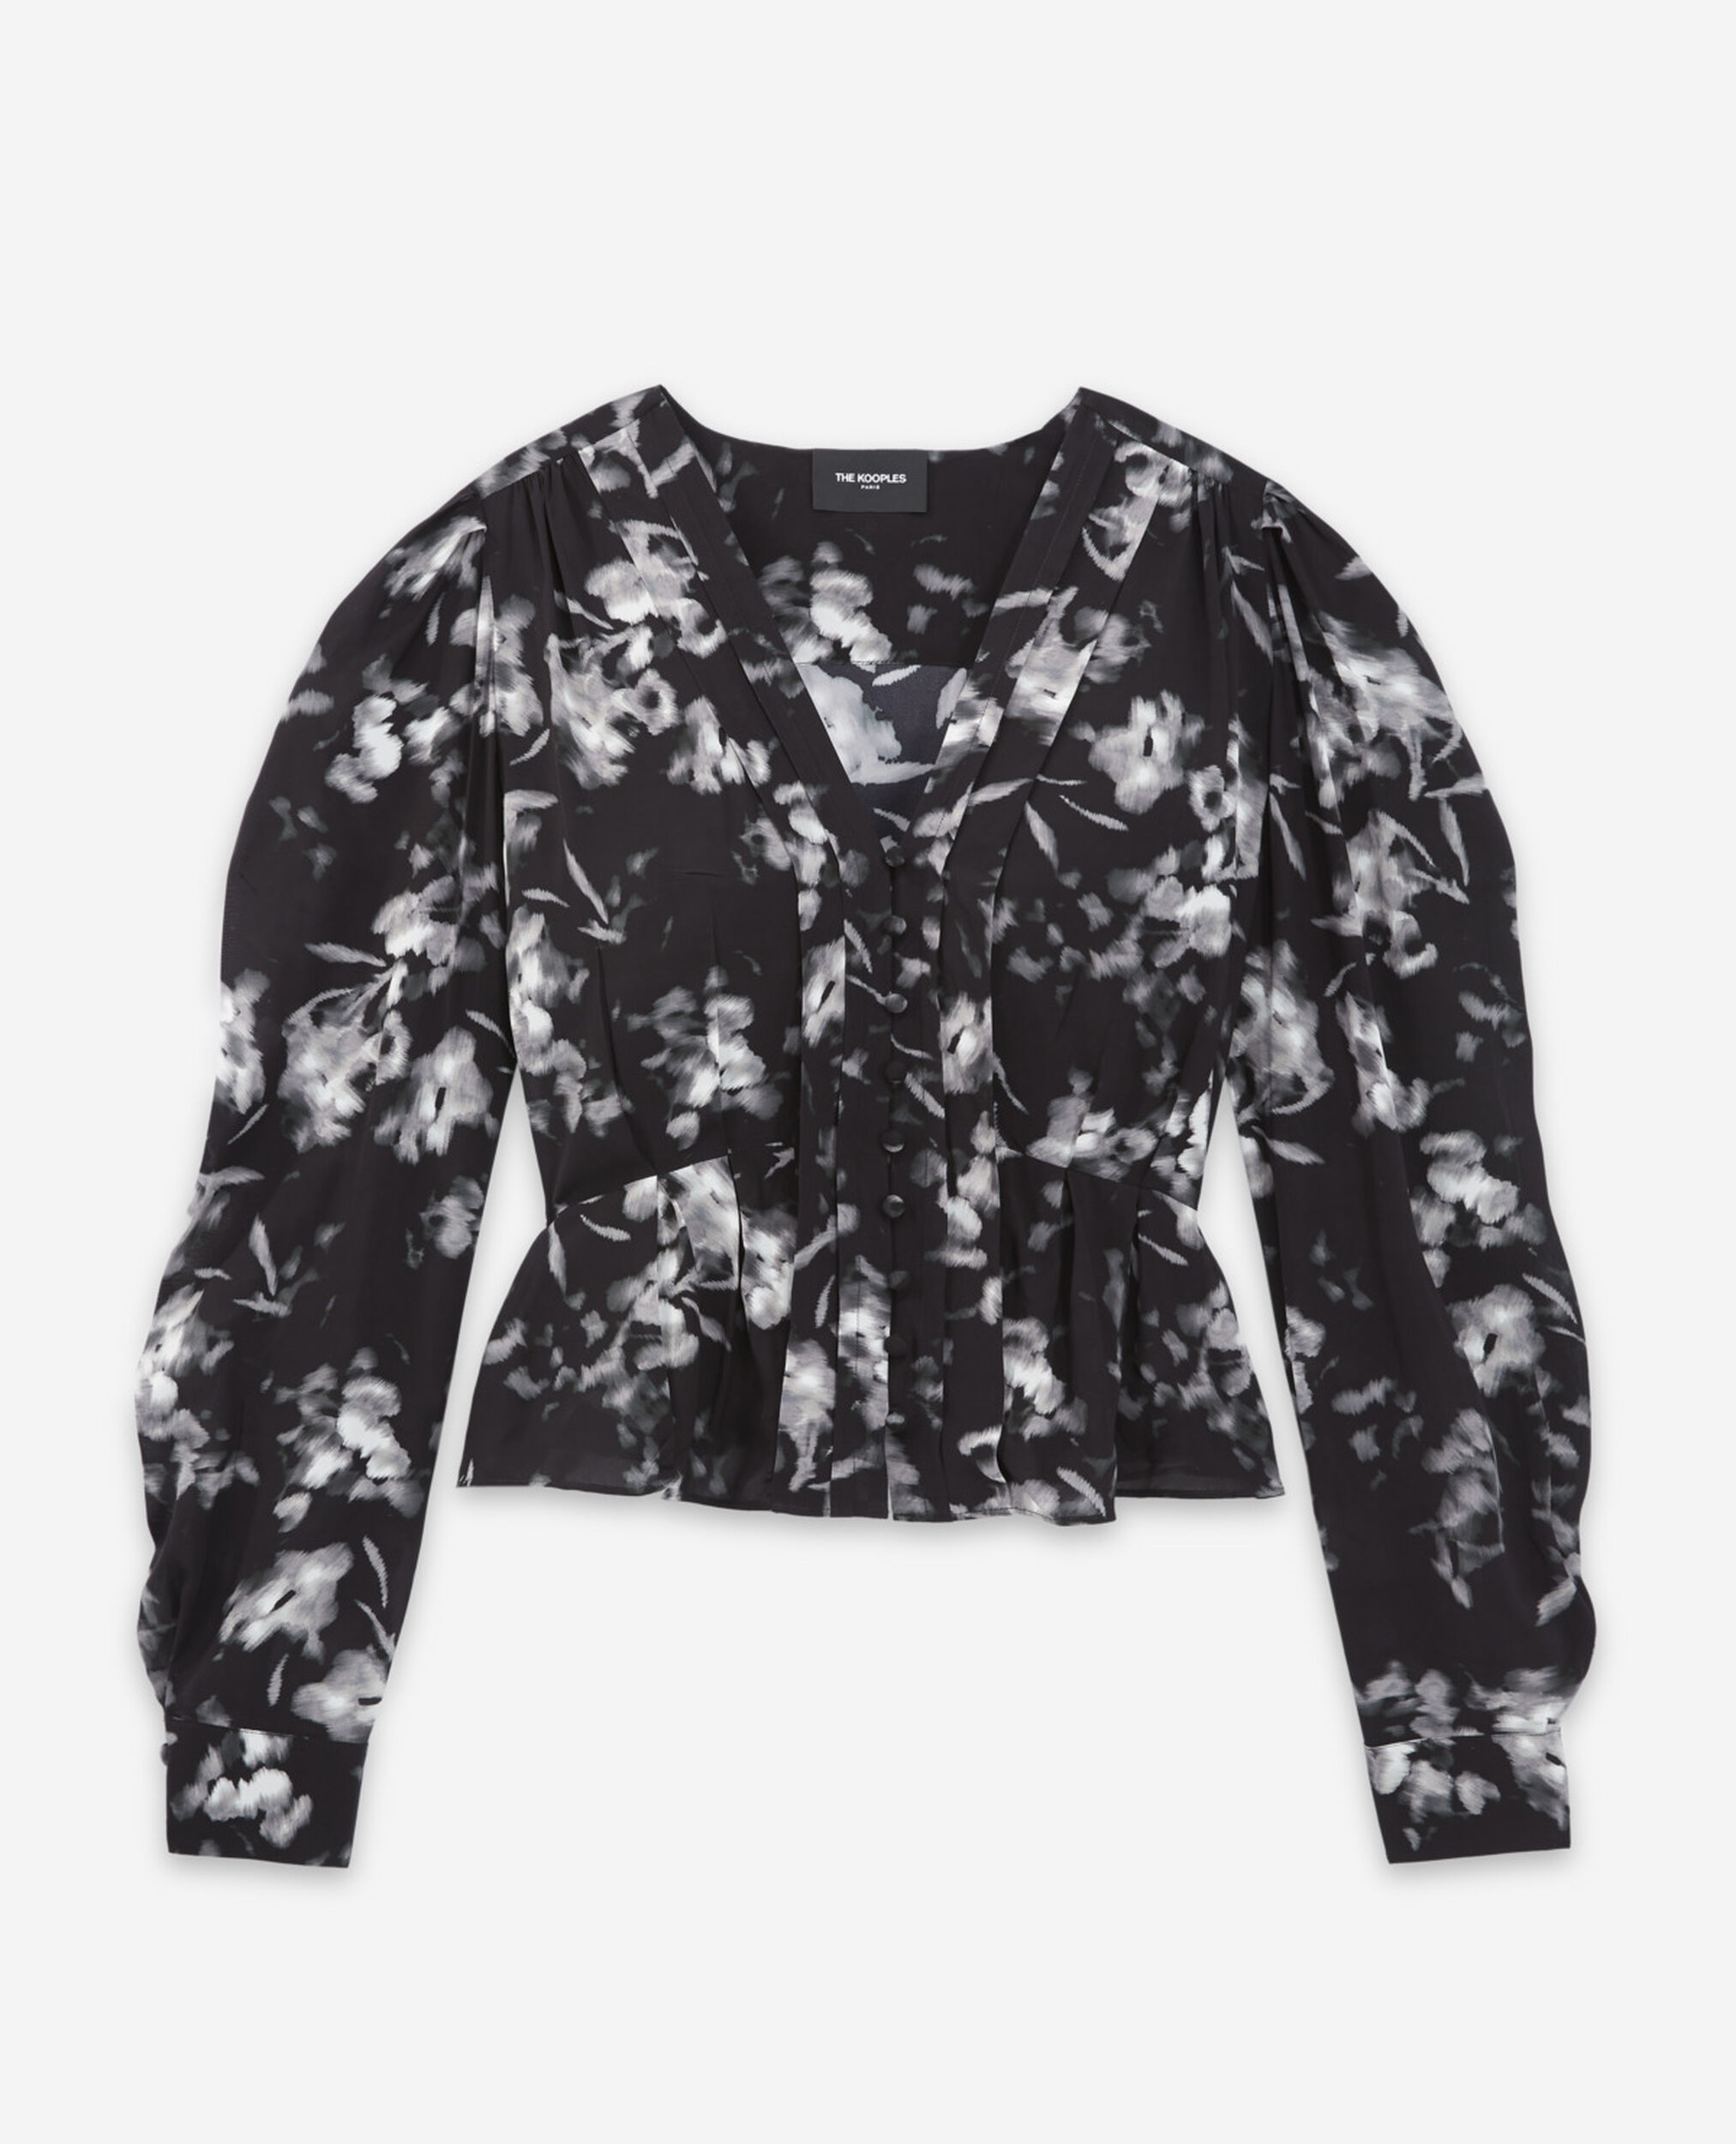 Flowing black top w/ pleating and floral motif, BLACK WHITE, hi-res image number null